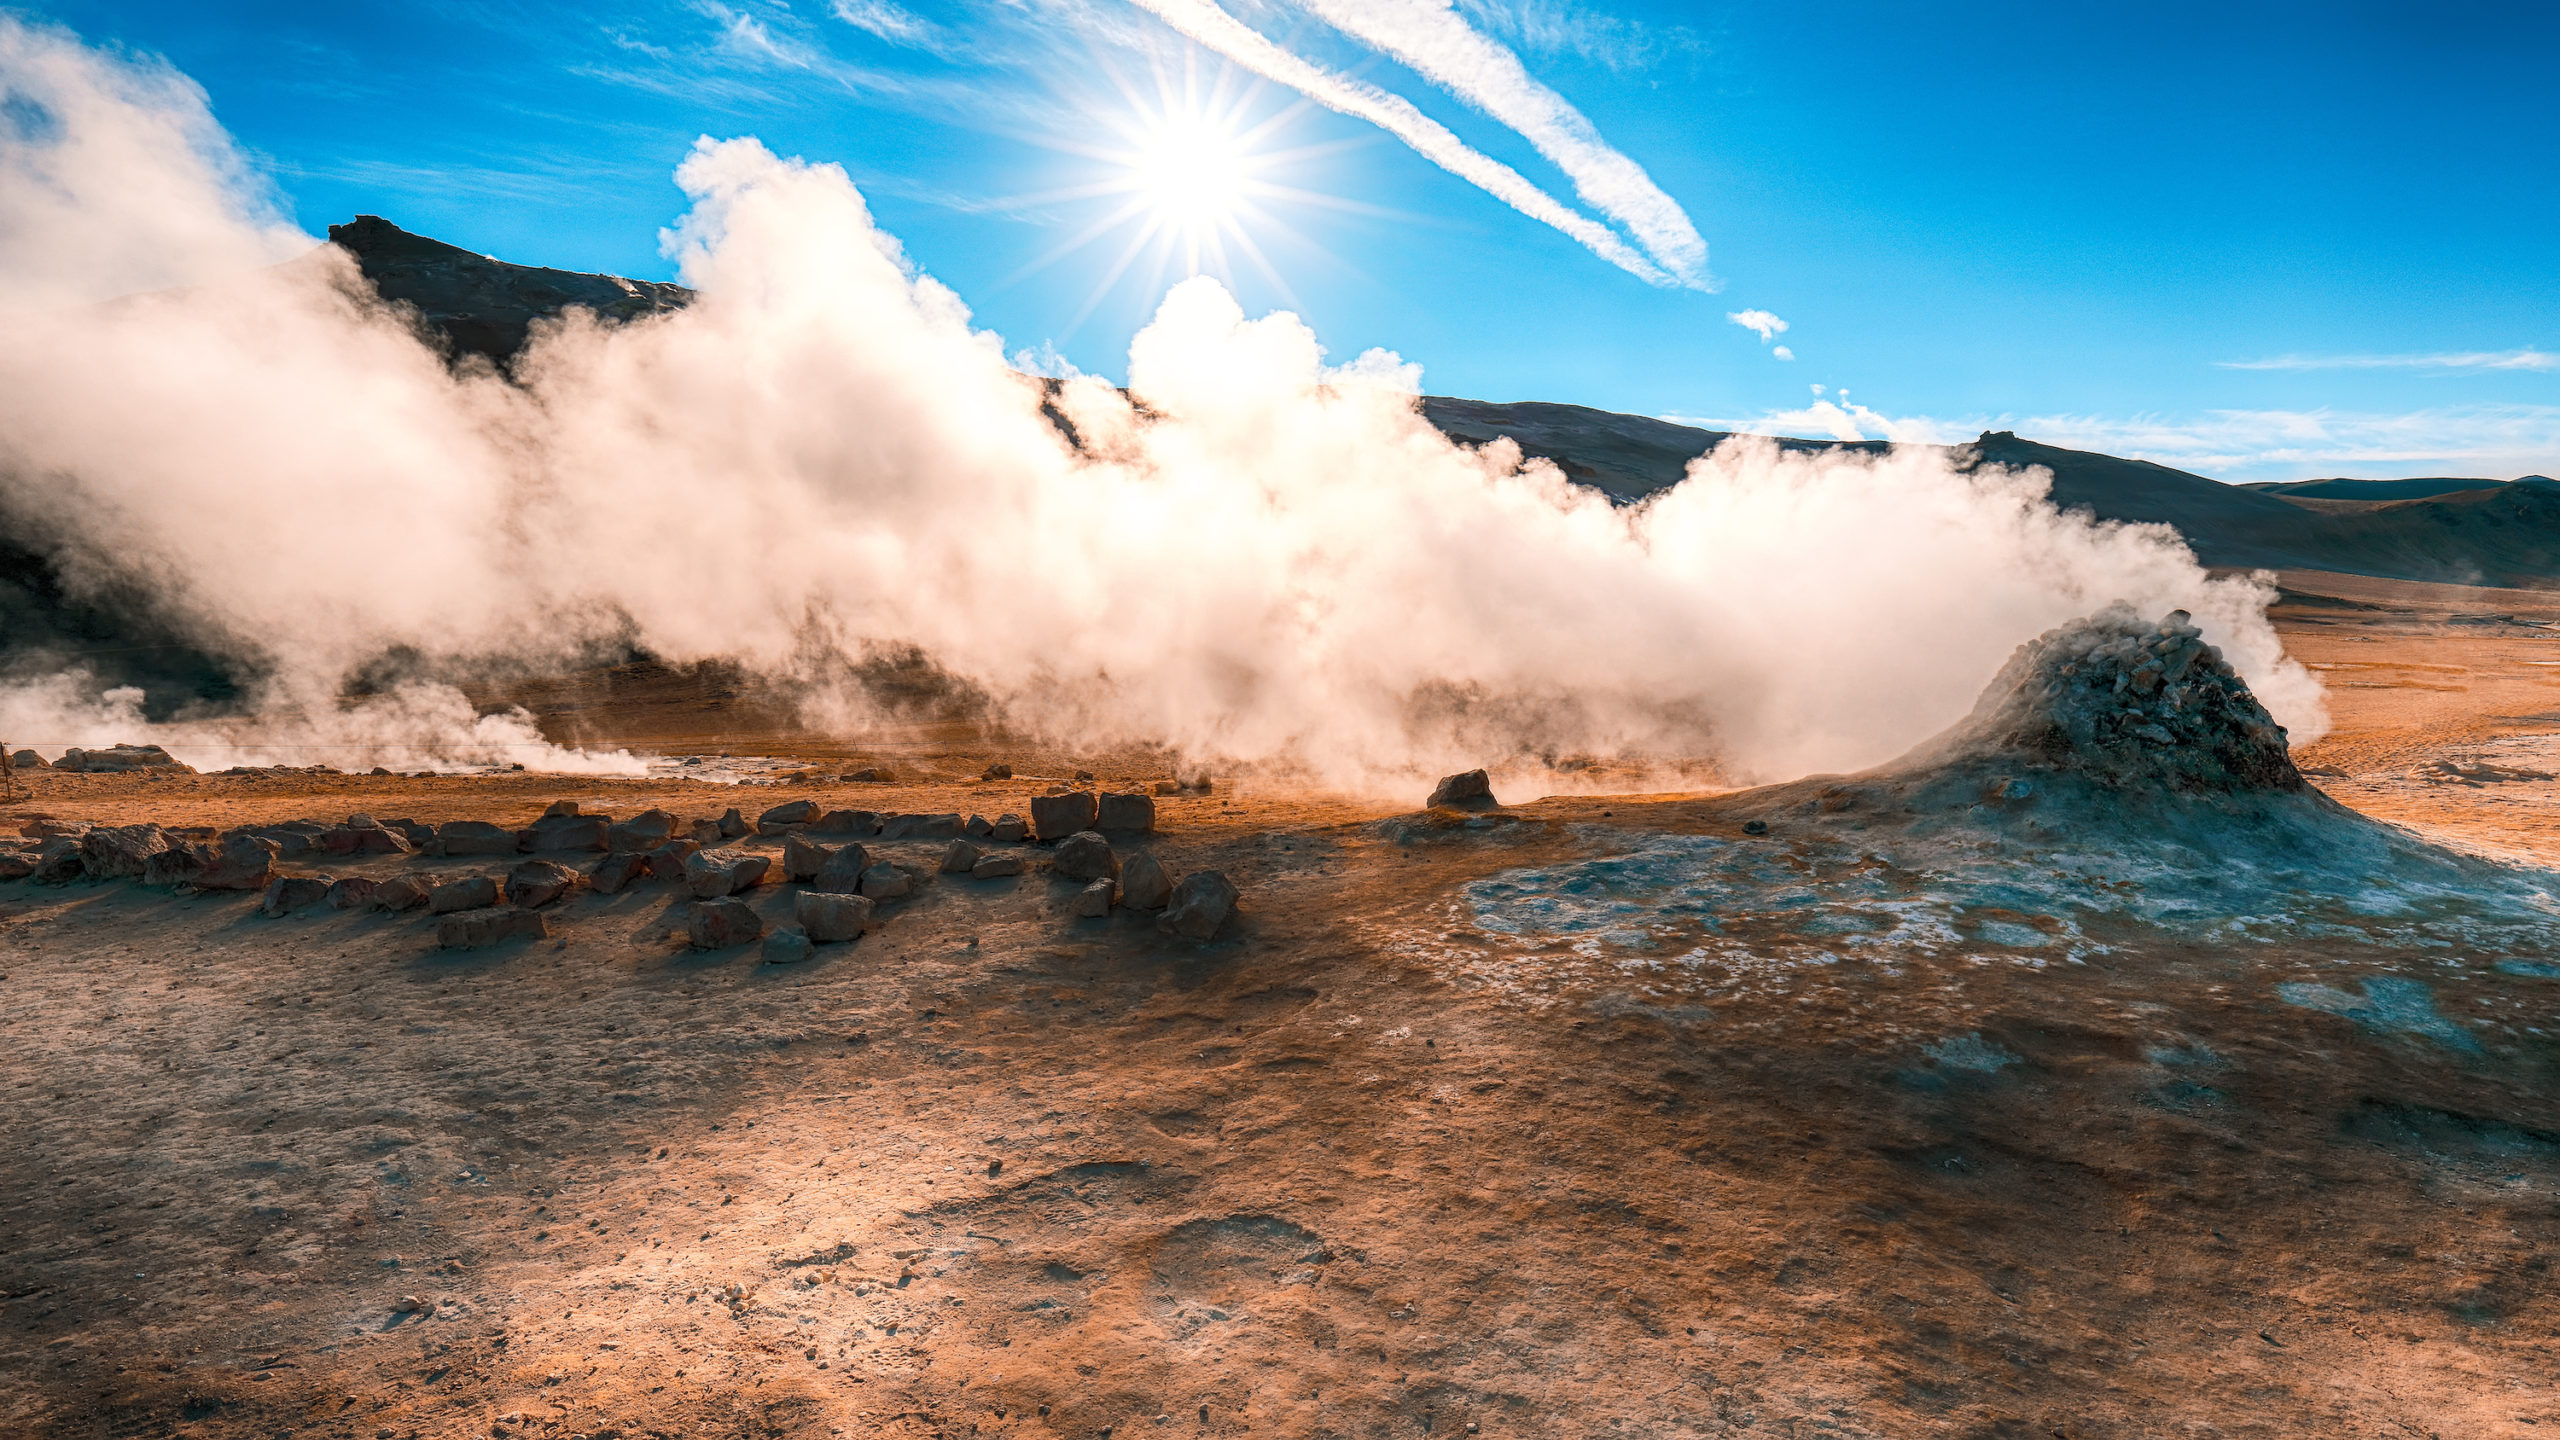 Explaining geothermal energy and the energy transition